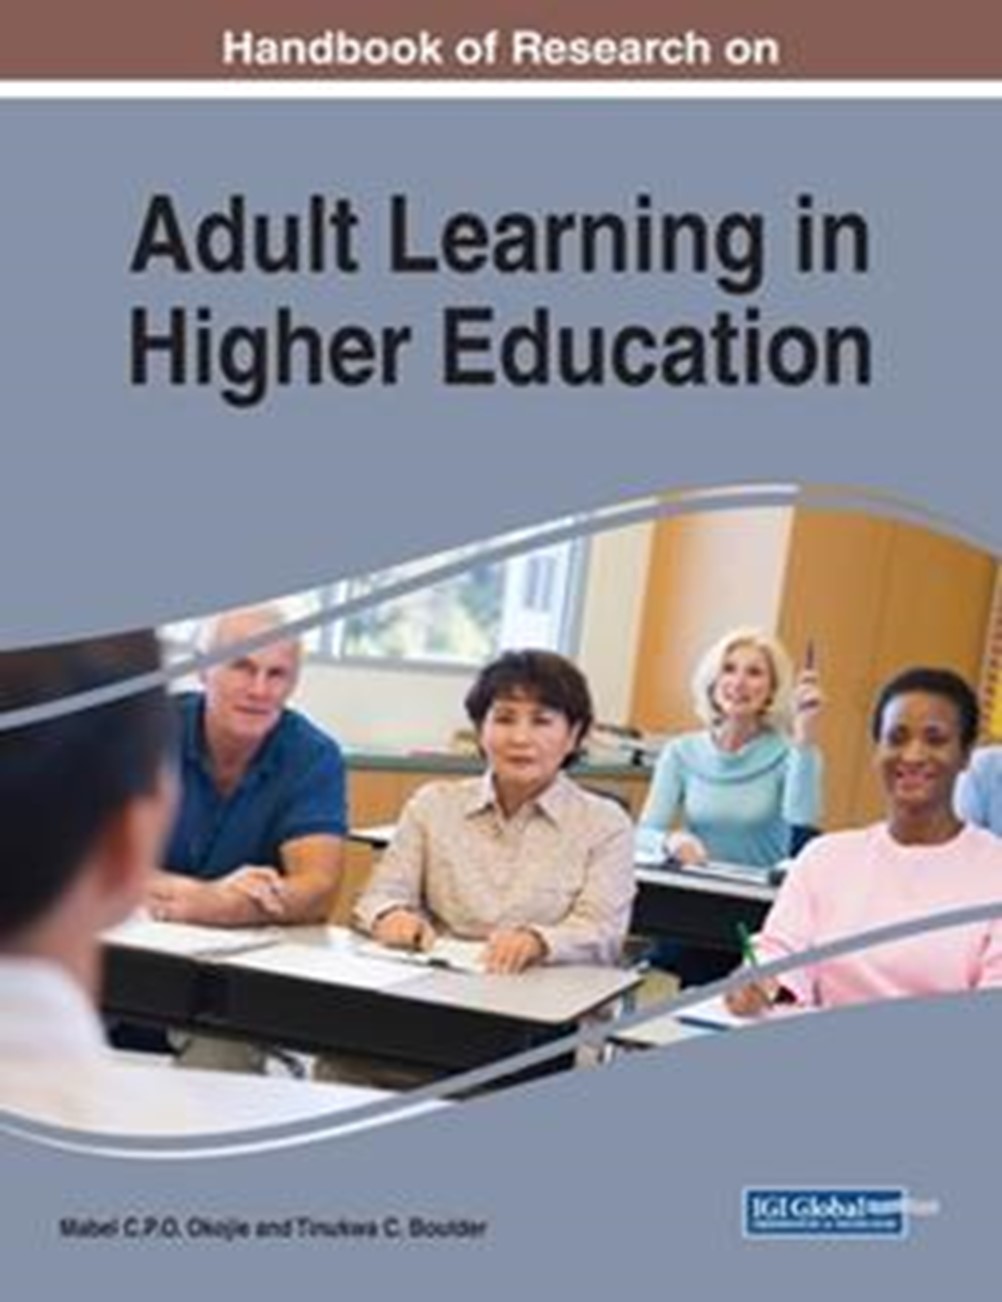 Adult Learning in Higher Education